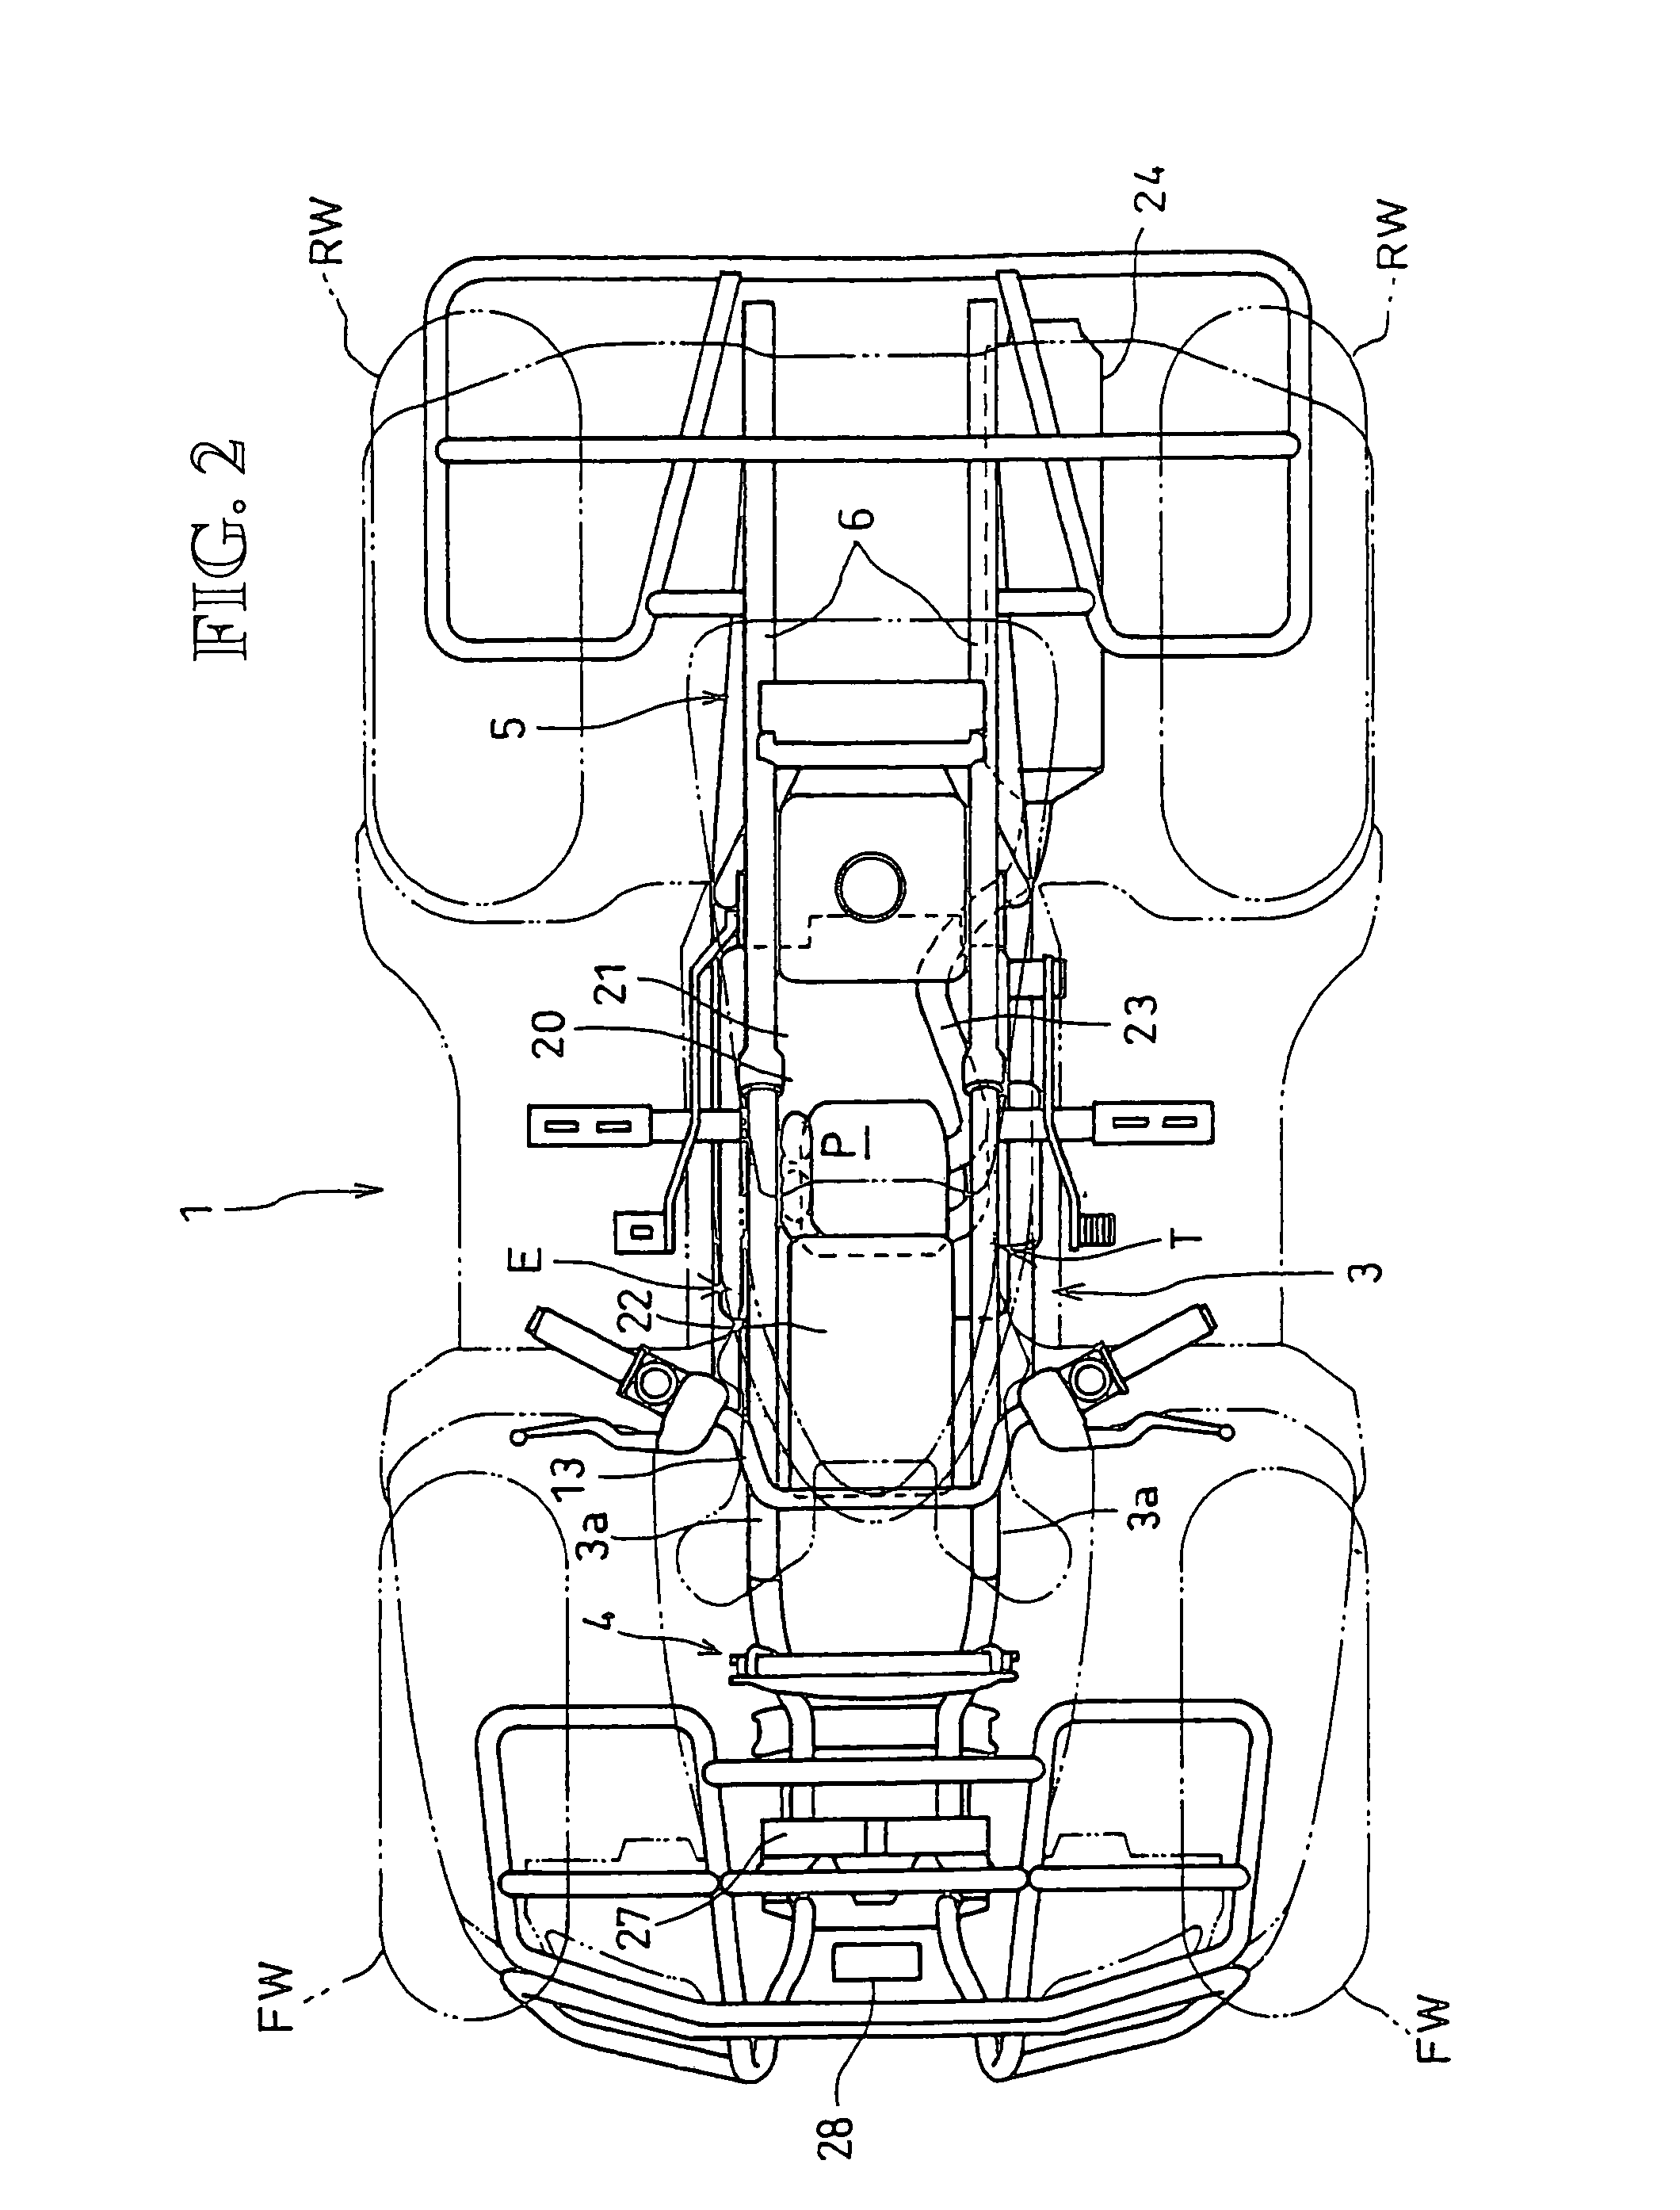 Crankcase structure for an internal combustion engine